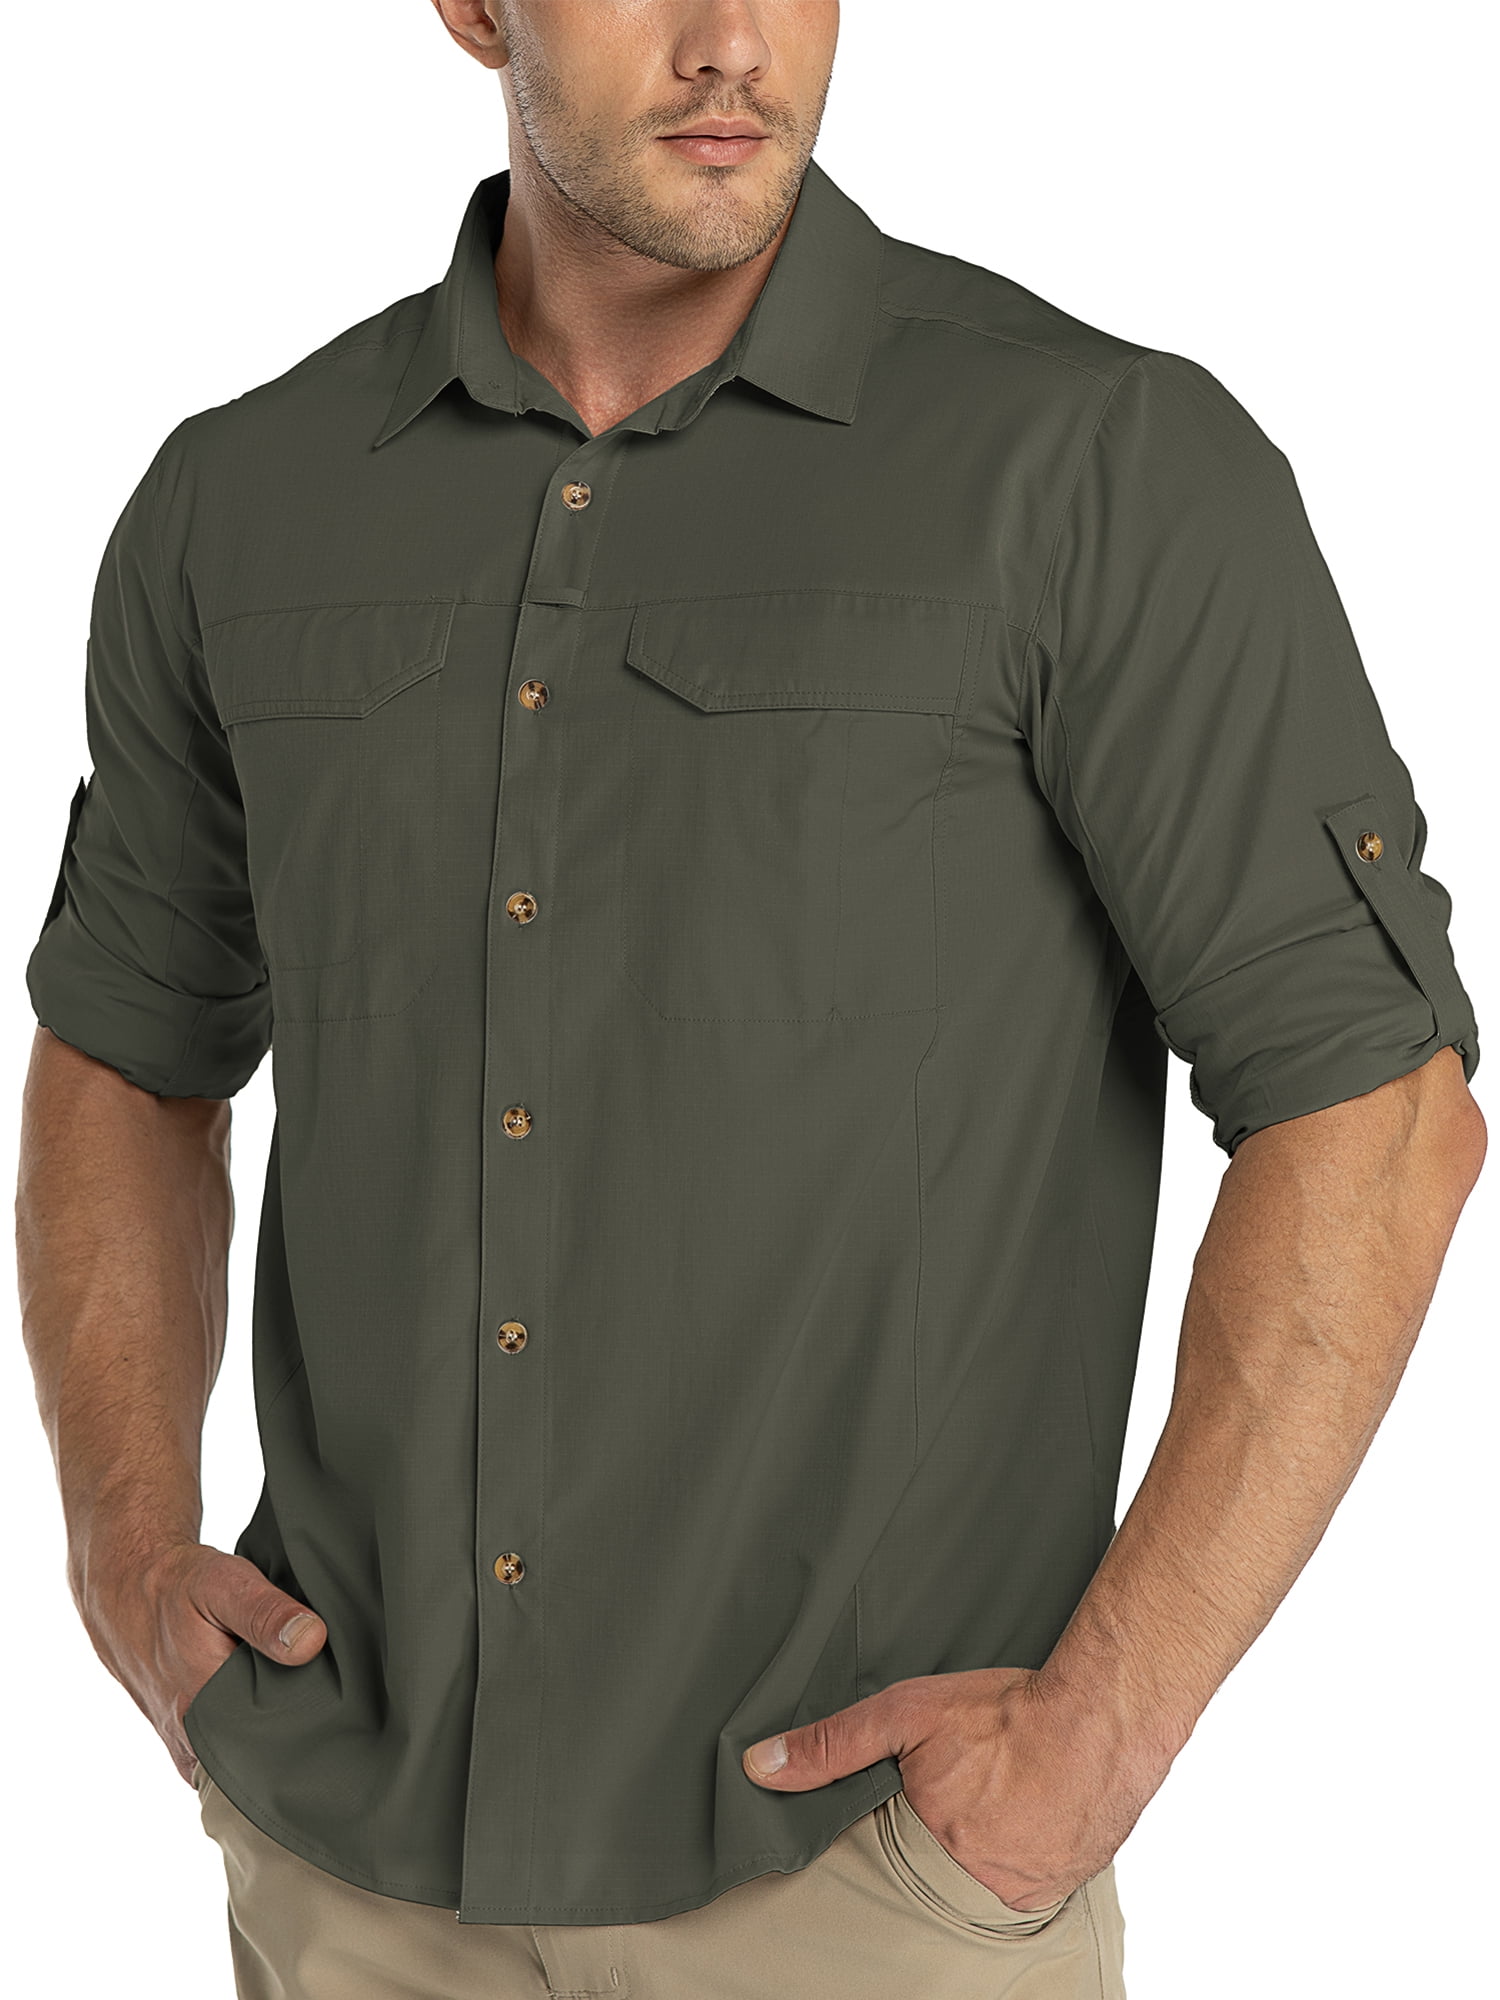 Momentum Comfort Gear Men's Performance Short Sleeve Button Up Quick Dry  Shirt 50+ UPF Fishing Shirt, Faded Fish, Size M at  Men's Clothing  store